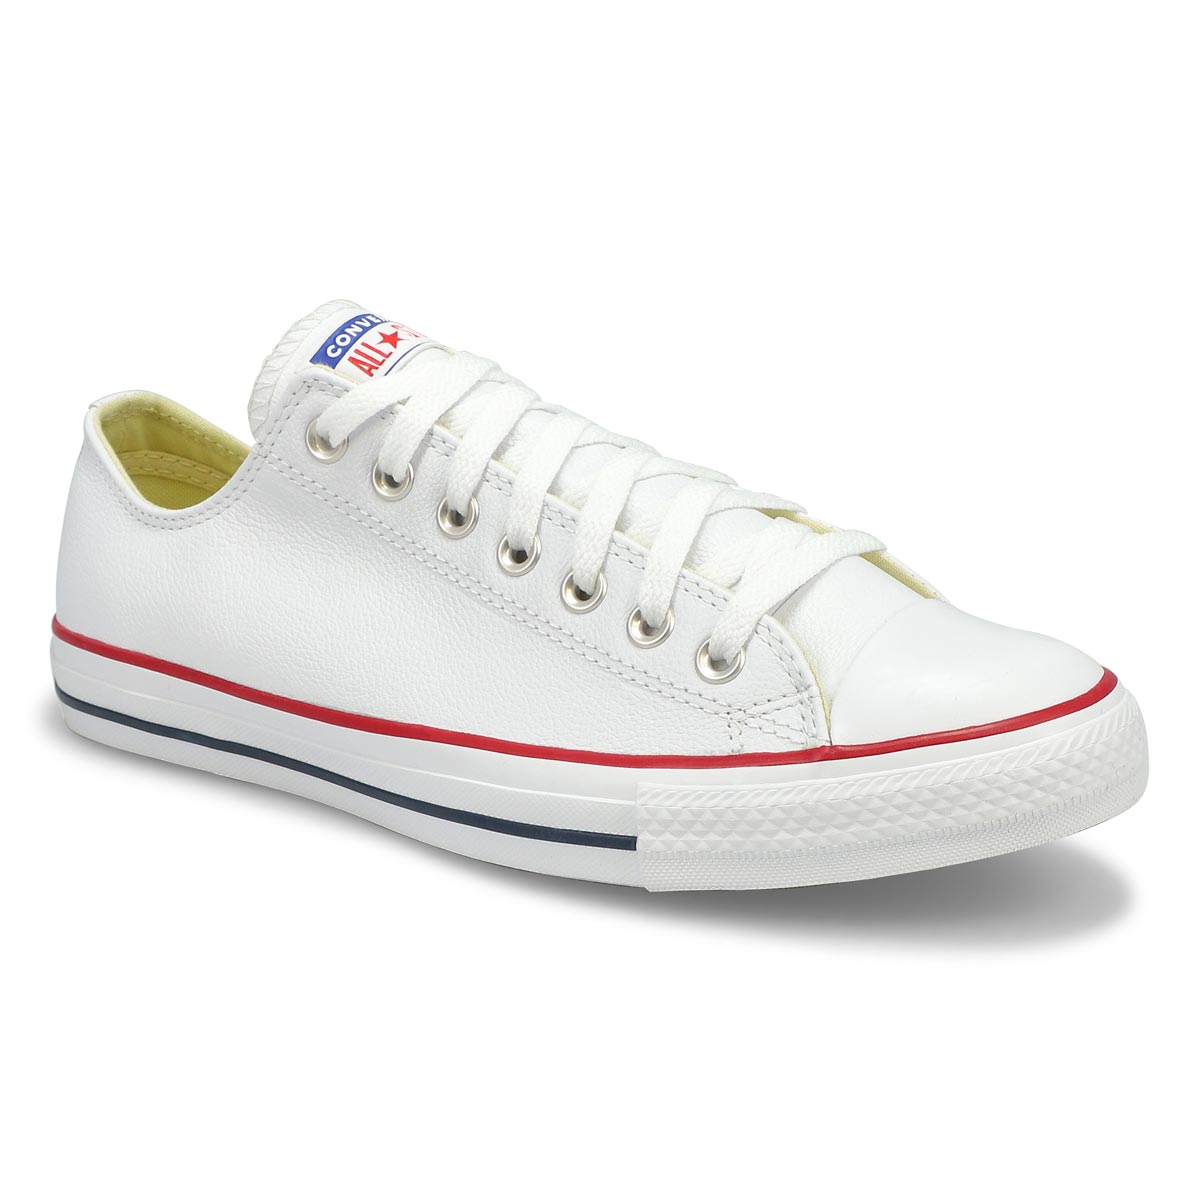 converse all star leather ox plimsolls